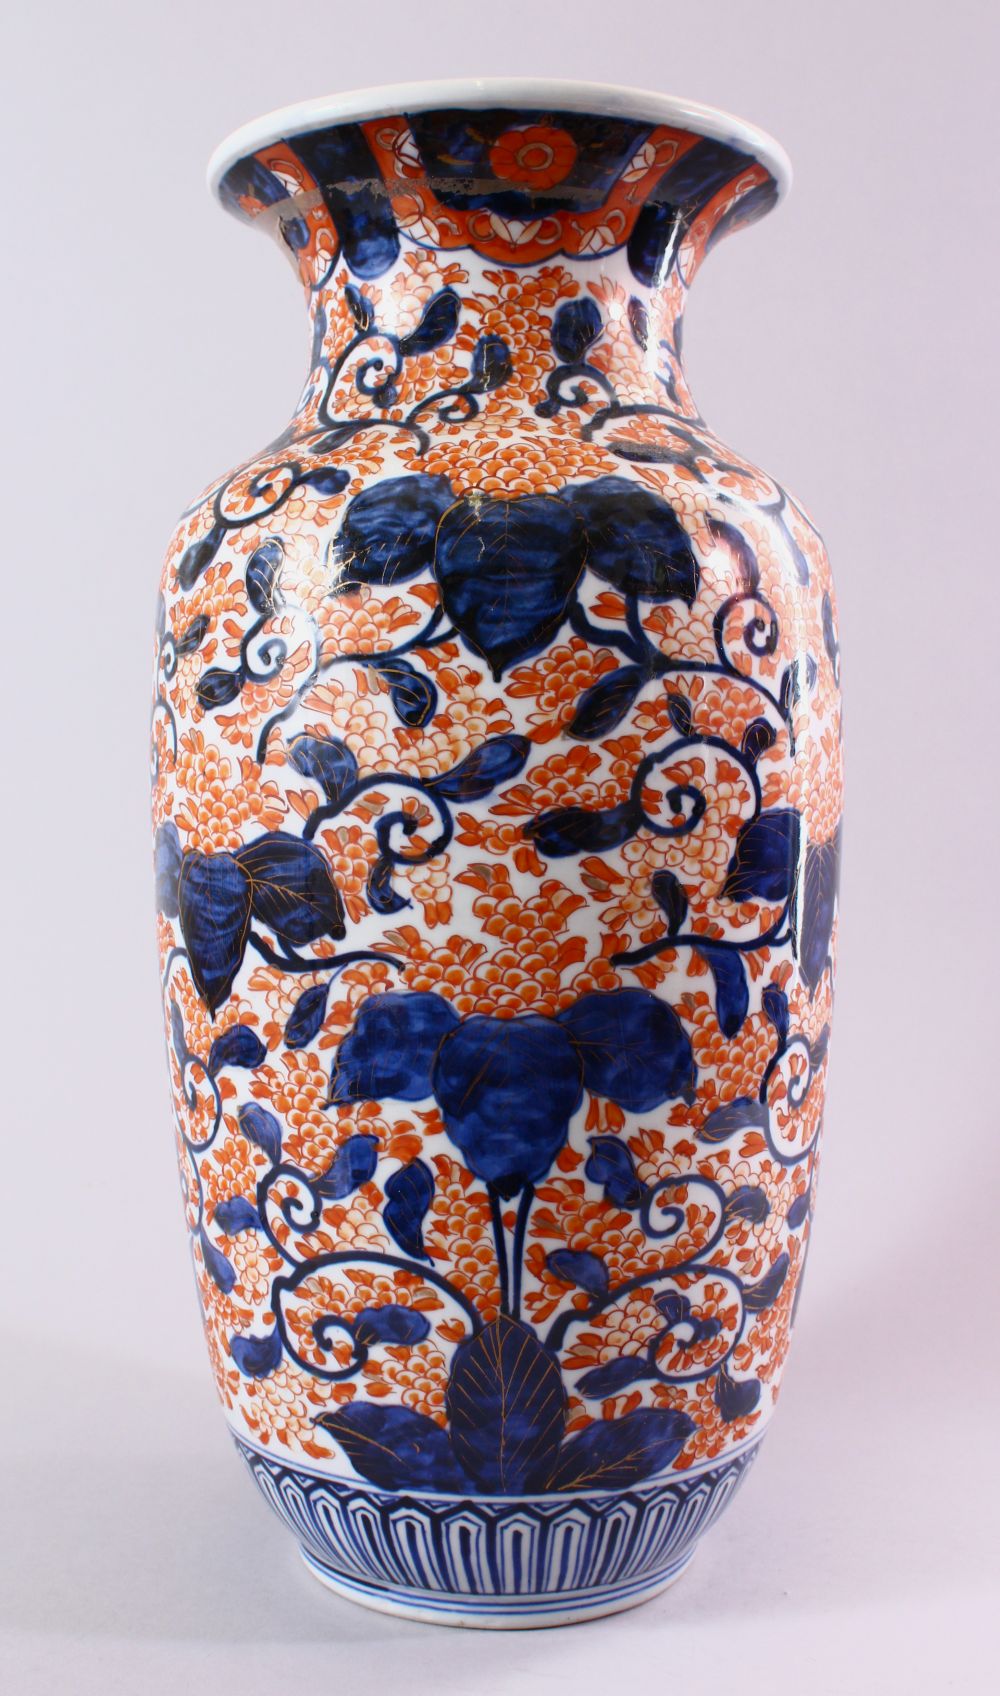 A JAPANESE MEIJI PERIOD IMARI PORCELAIN VASE, decorated with scrolling native flora in typical imari